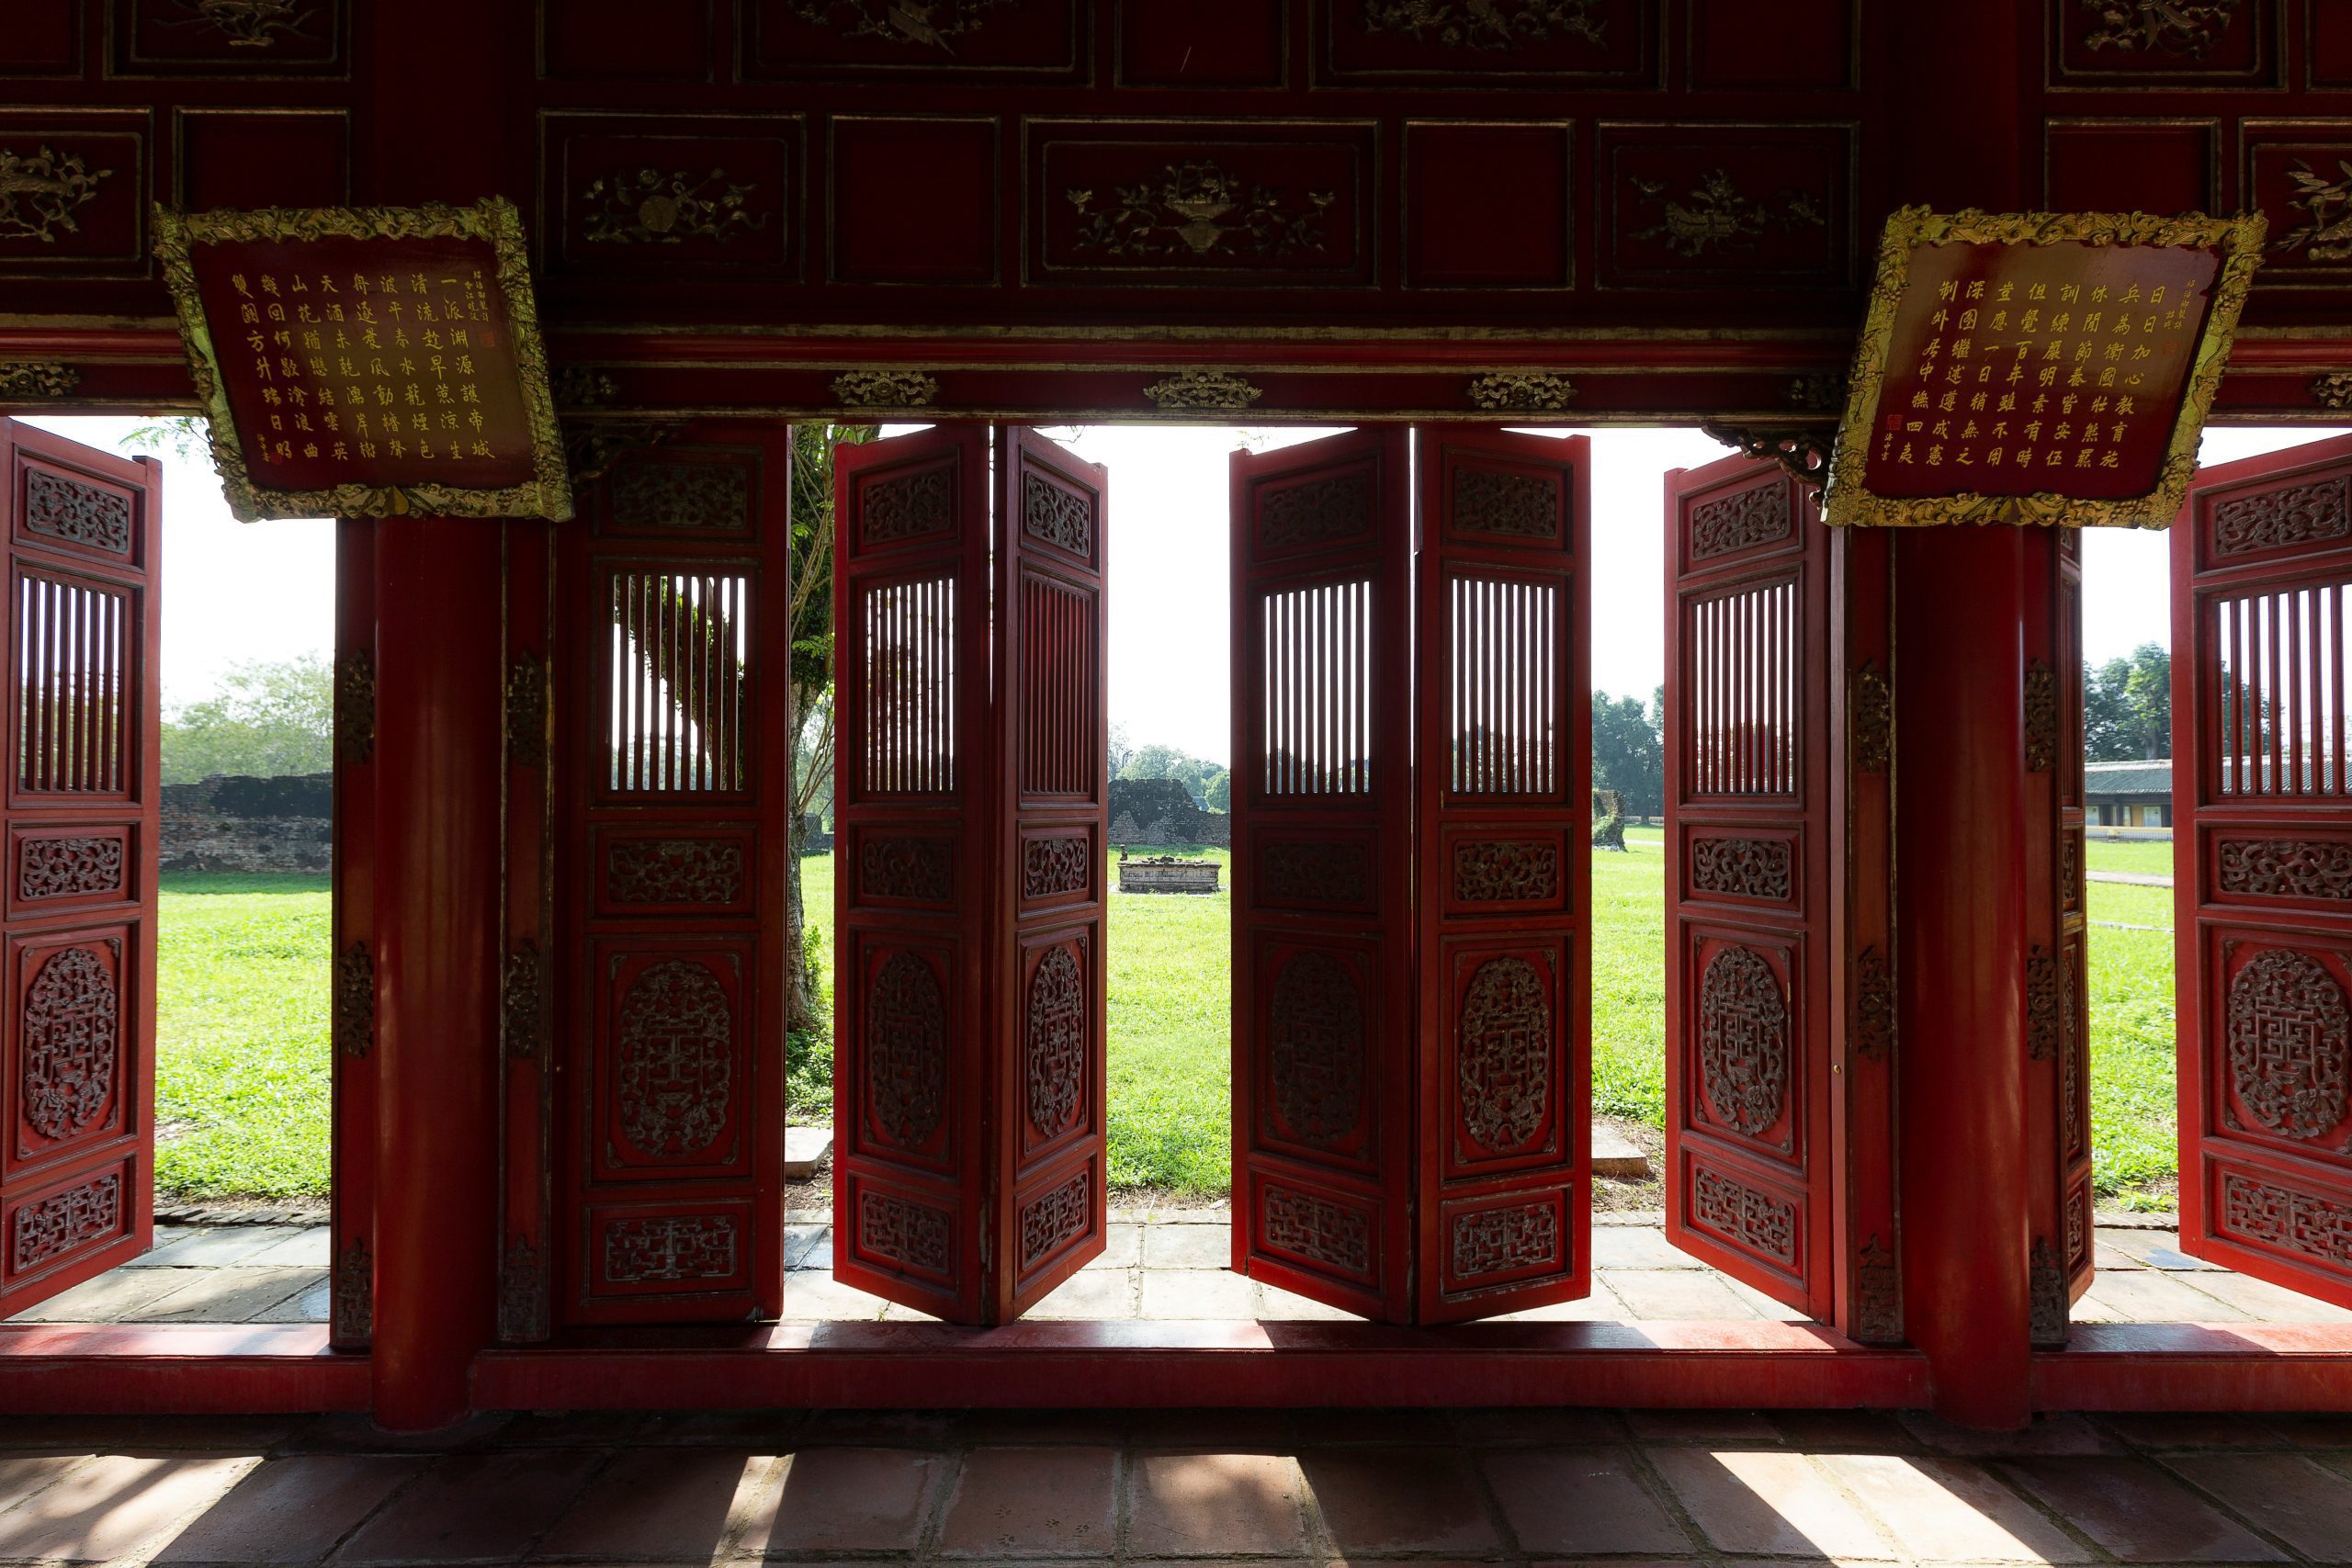 Important Facts About the Architecture of Hue Imperial City